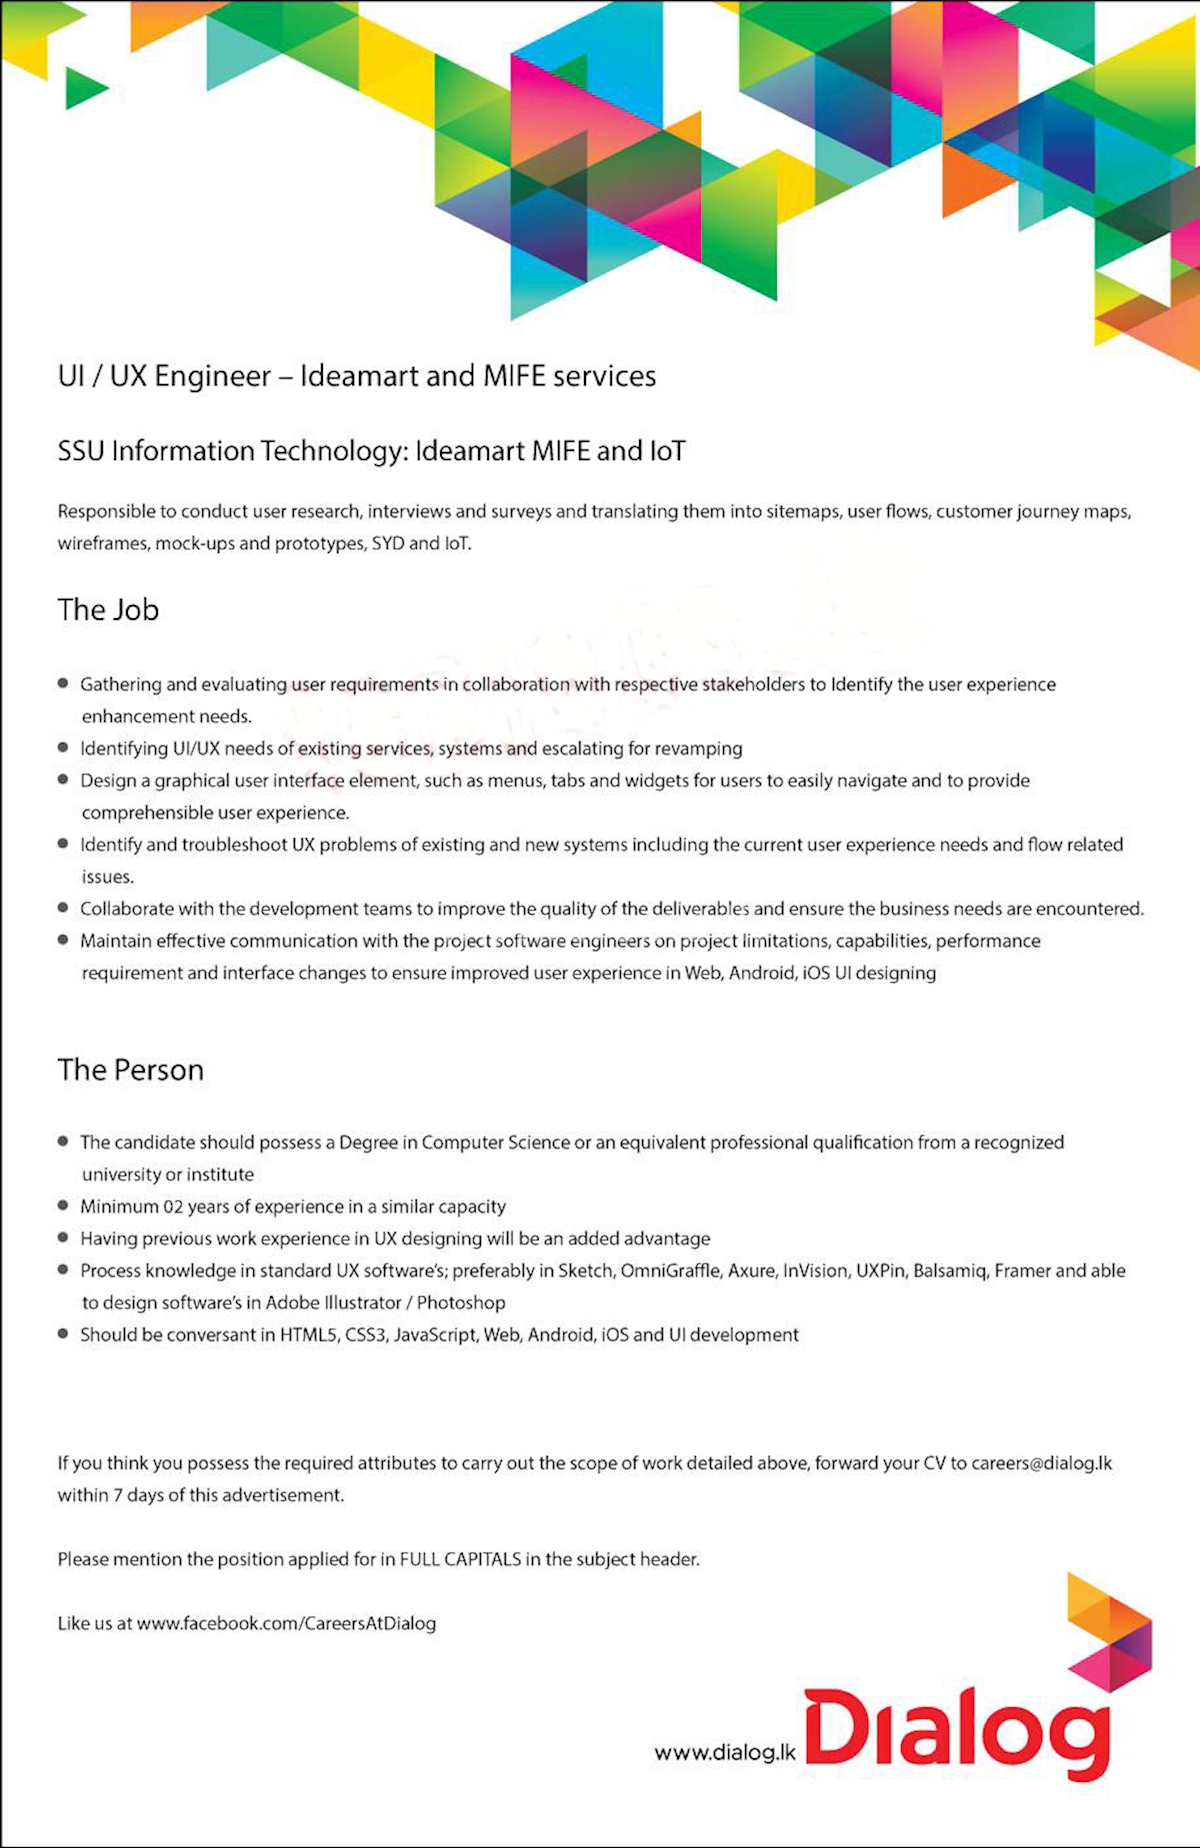 UI / UX Engineer - Ideamart and MIFE Services